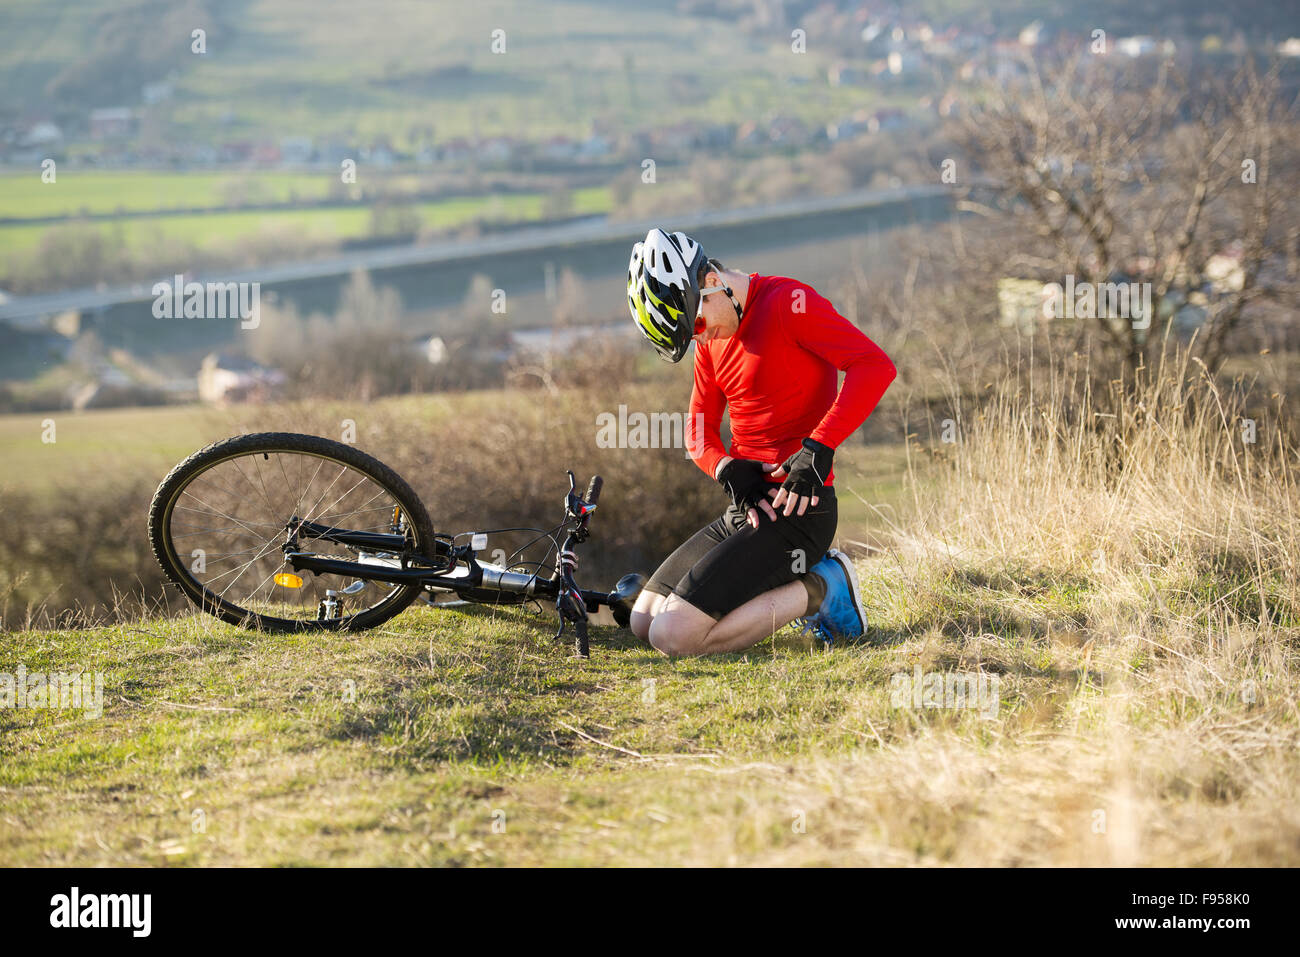 Young man injured during riding a bike Stock Photo